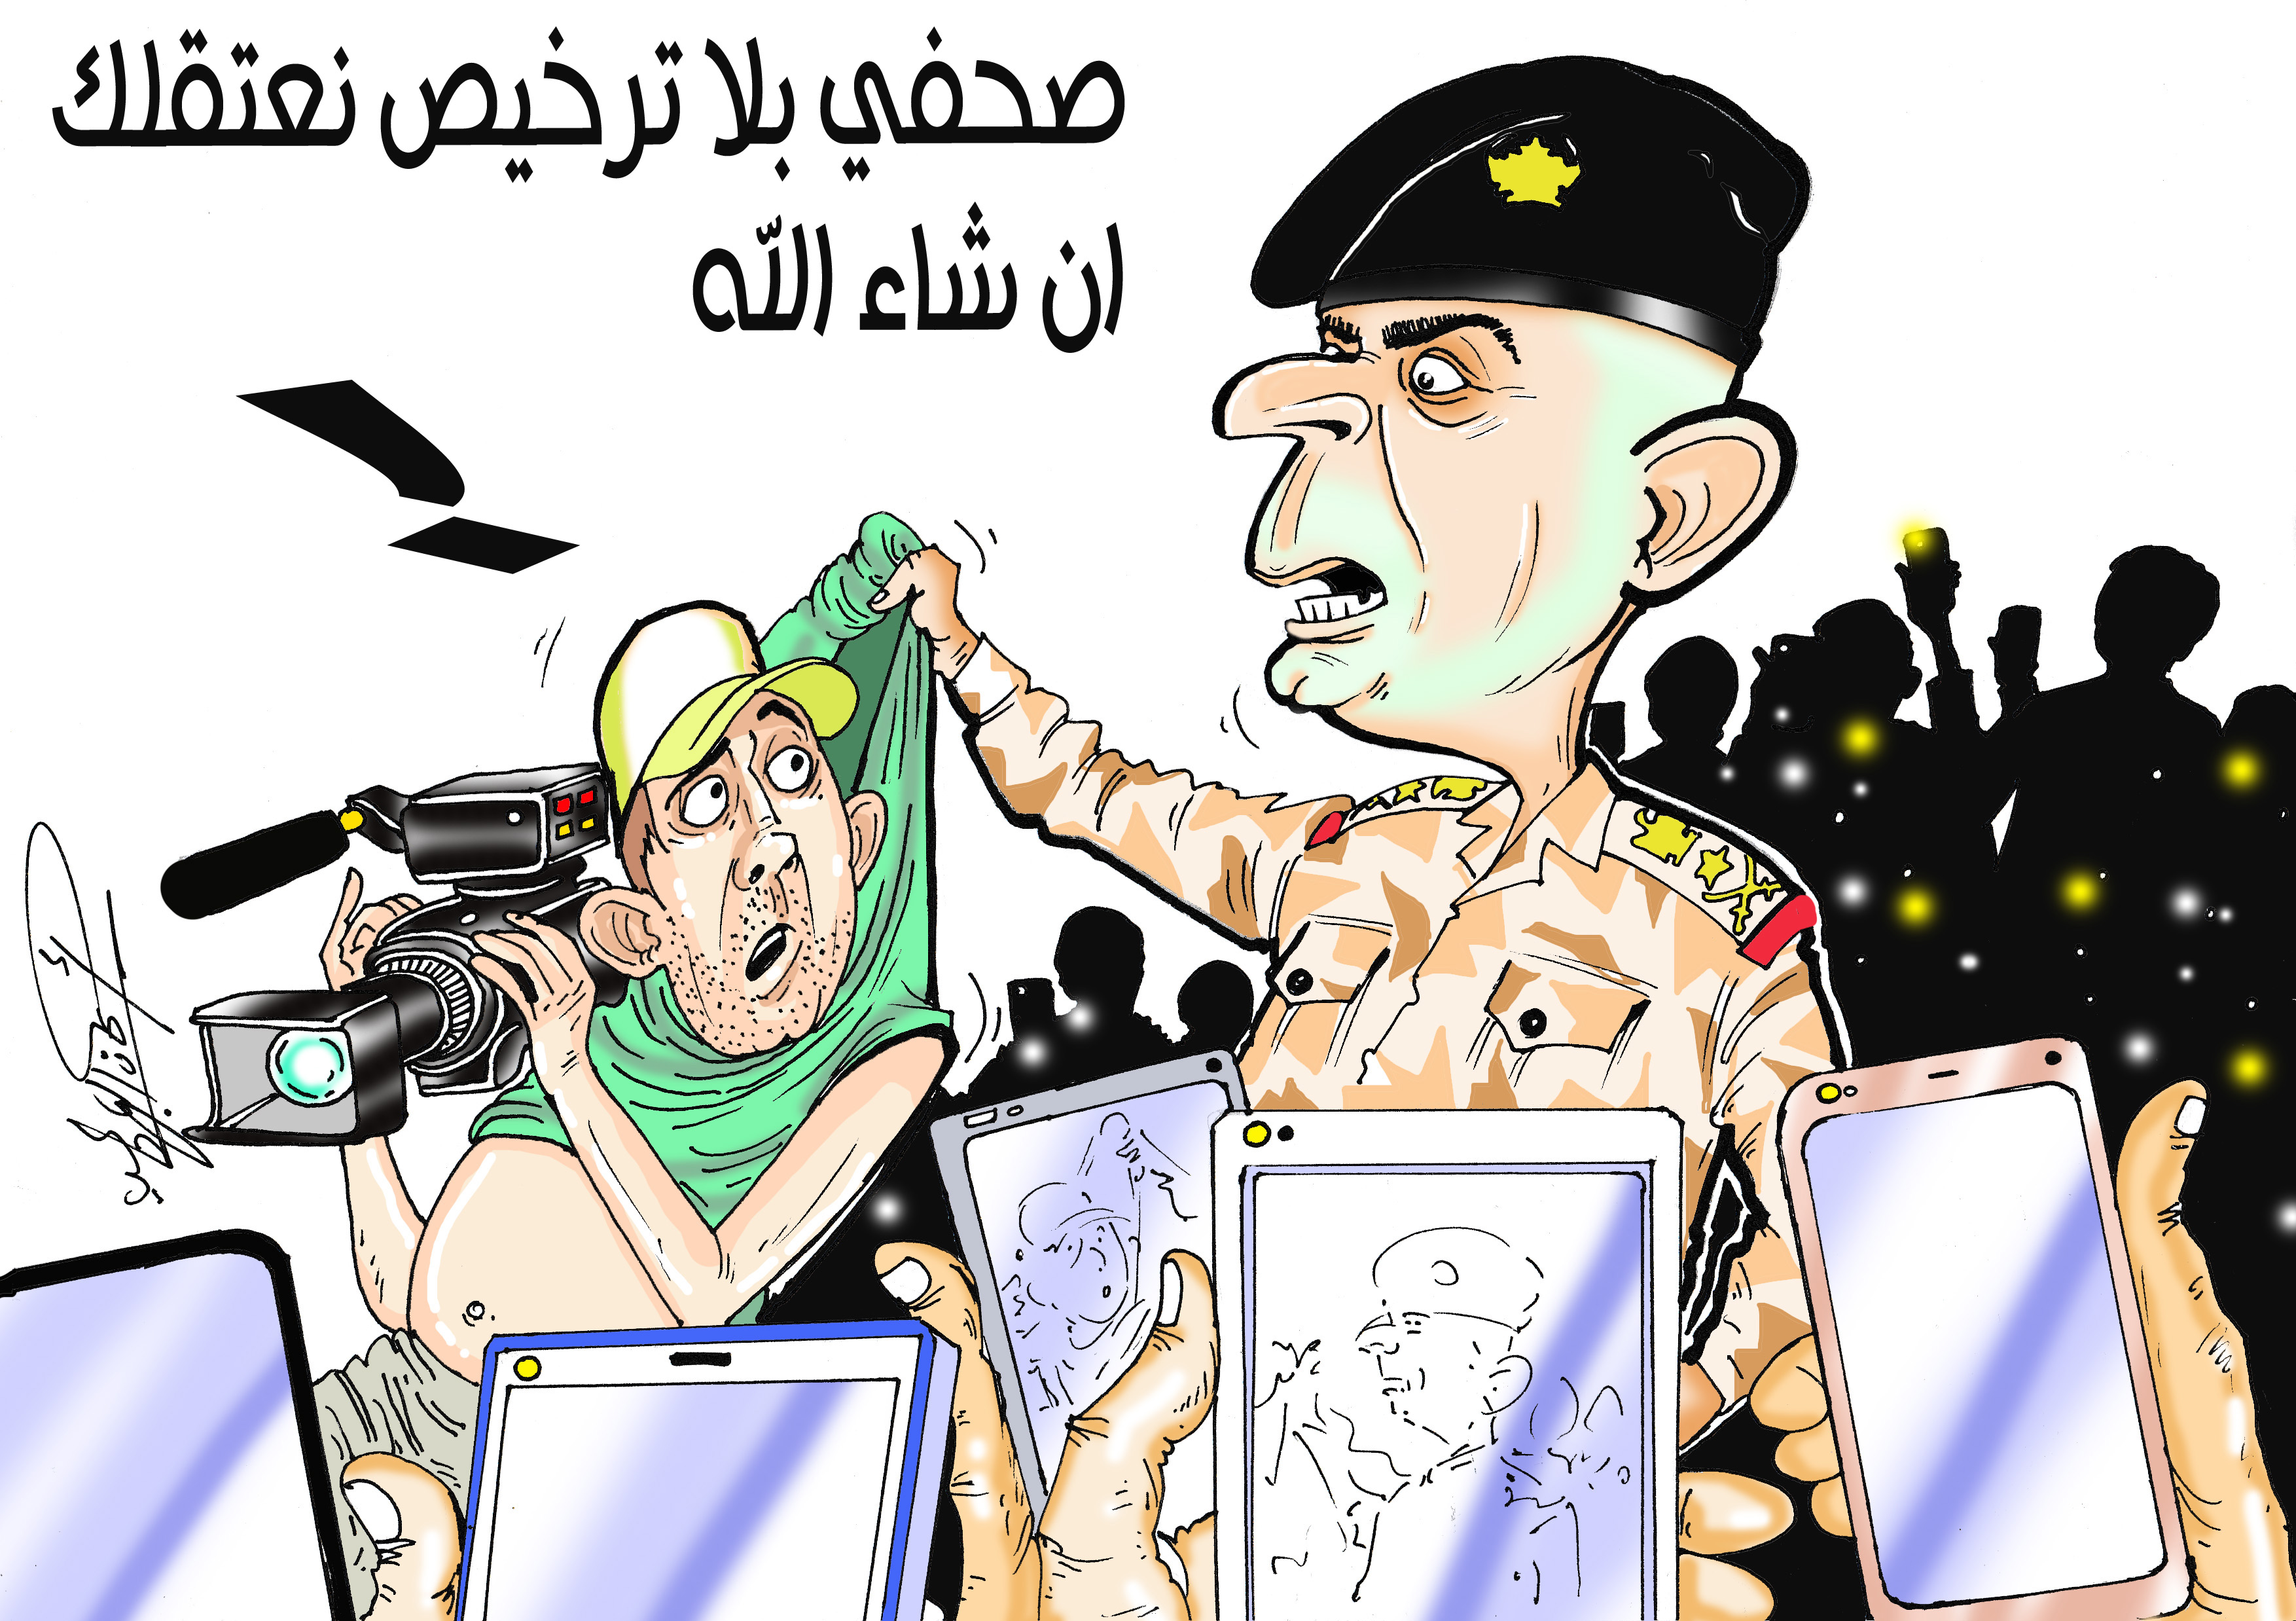 Cartoon depicting Major General Qassem Nazzal, the commander of Basra operations.  “A journalist without permission? We are going to arrest you inshallah” written above in Arabic (Azhar Al-Rubaie)